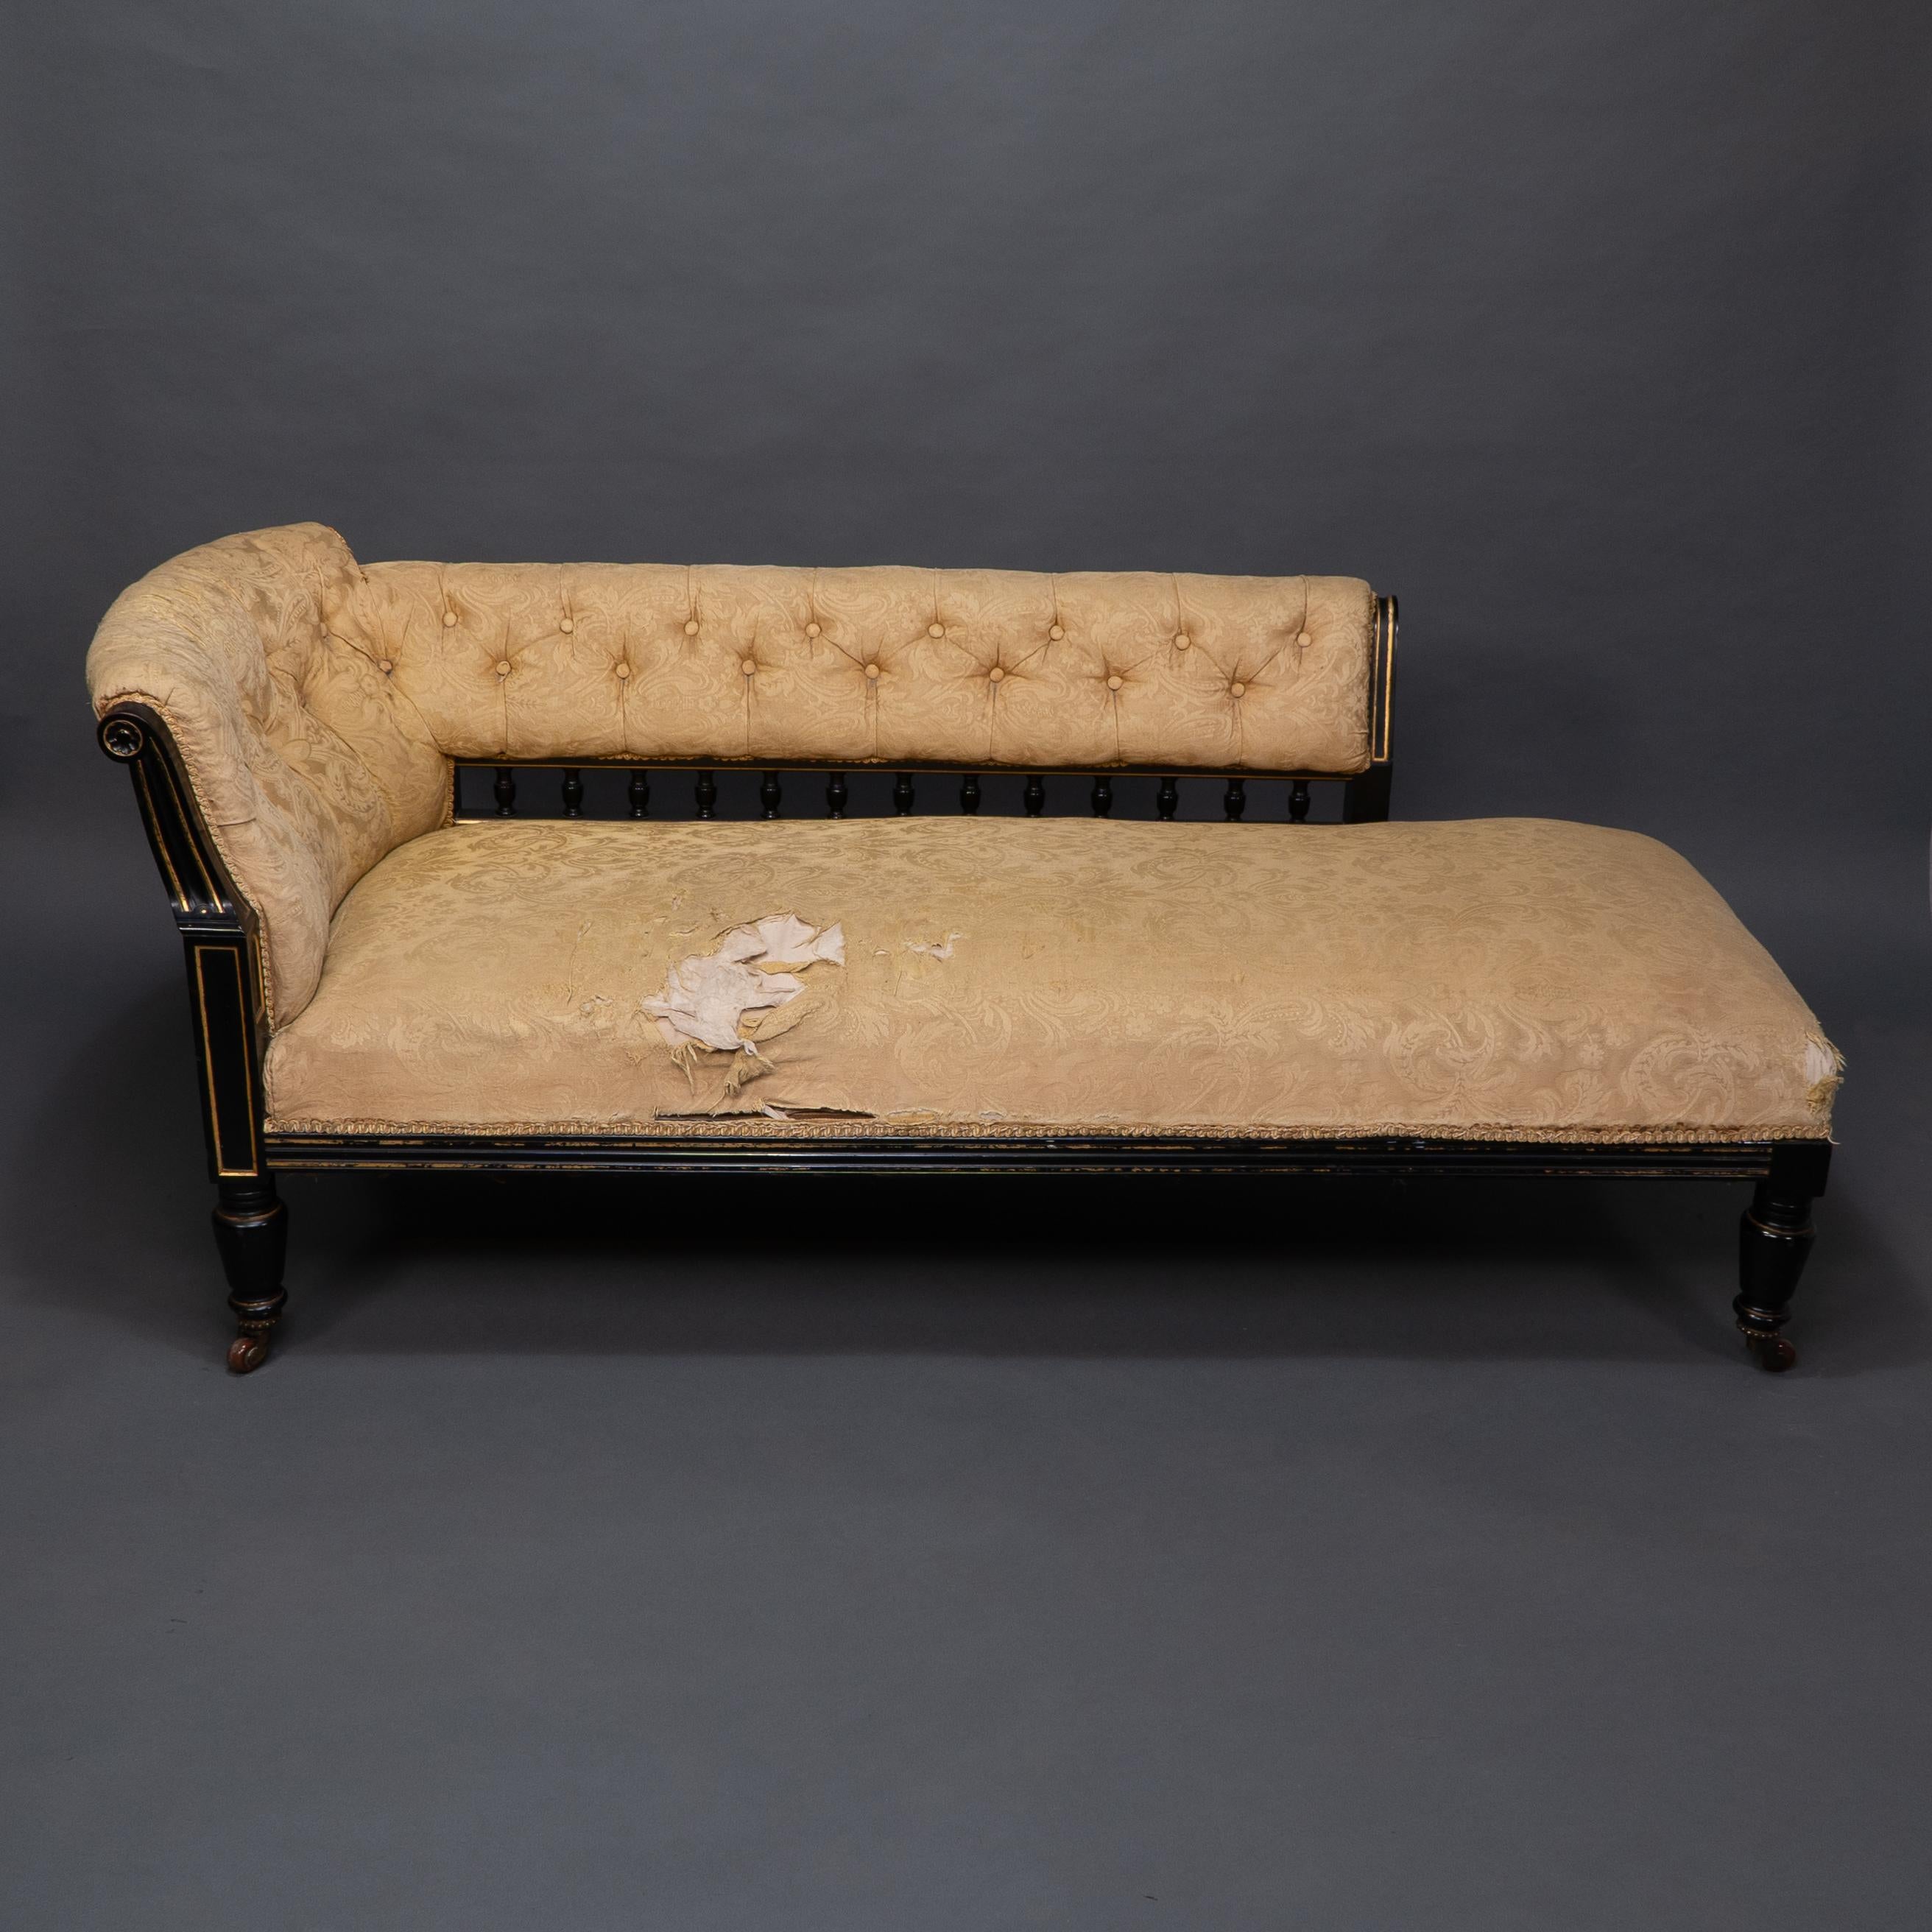 Charles Bevan for Marsh and Jones of Leeds Late Kendal works. A good Aesthetic Movement walnut ebonized button back chaise lounge with carved rosettes to the front upright and subtle blind carved decoration with gilded highlights and an unusual